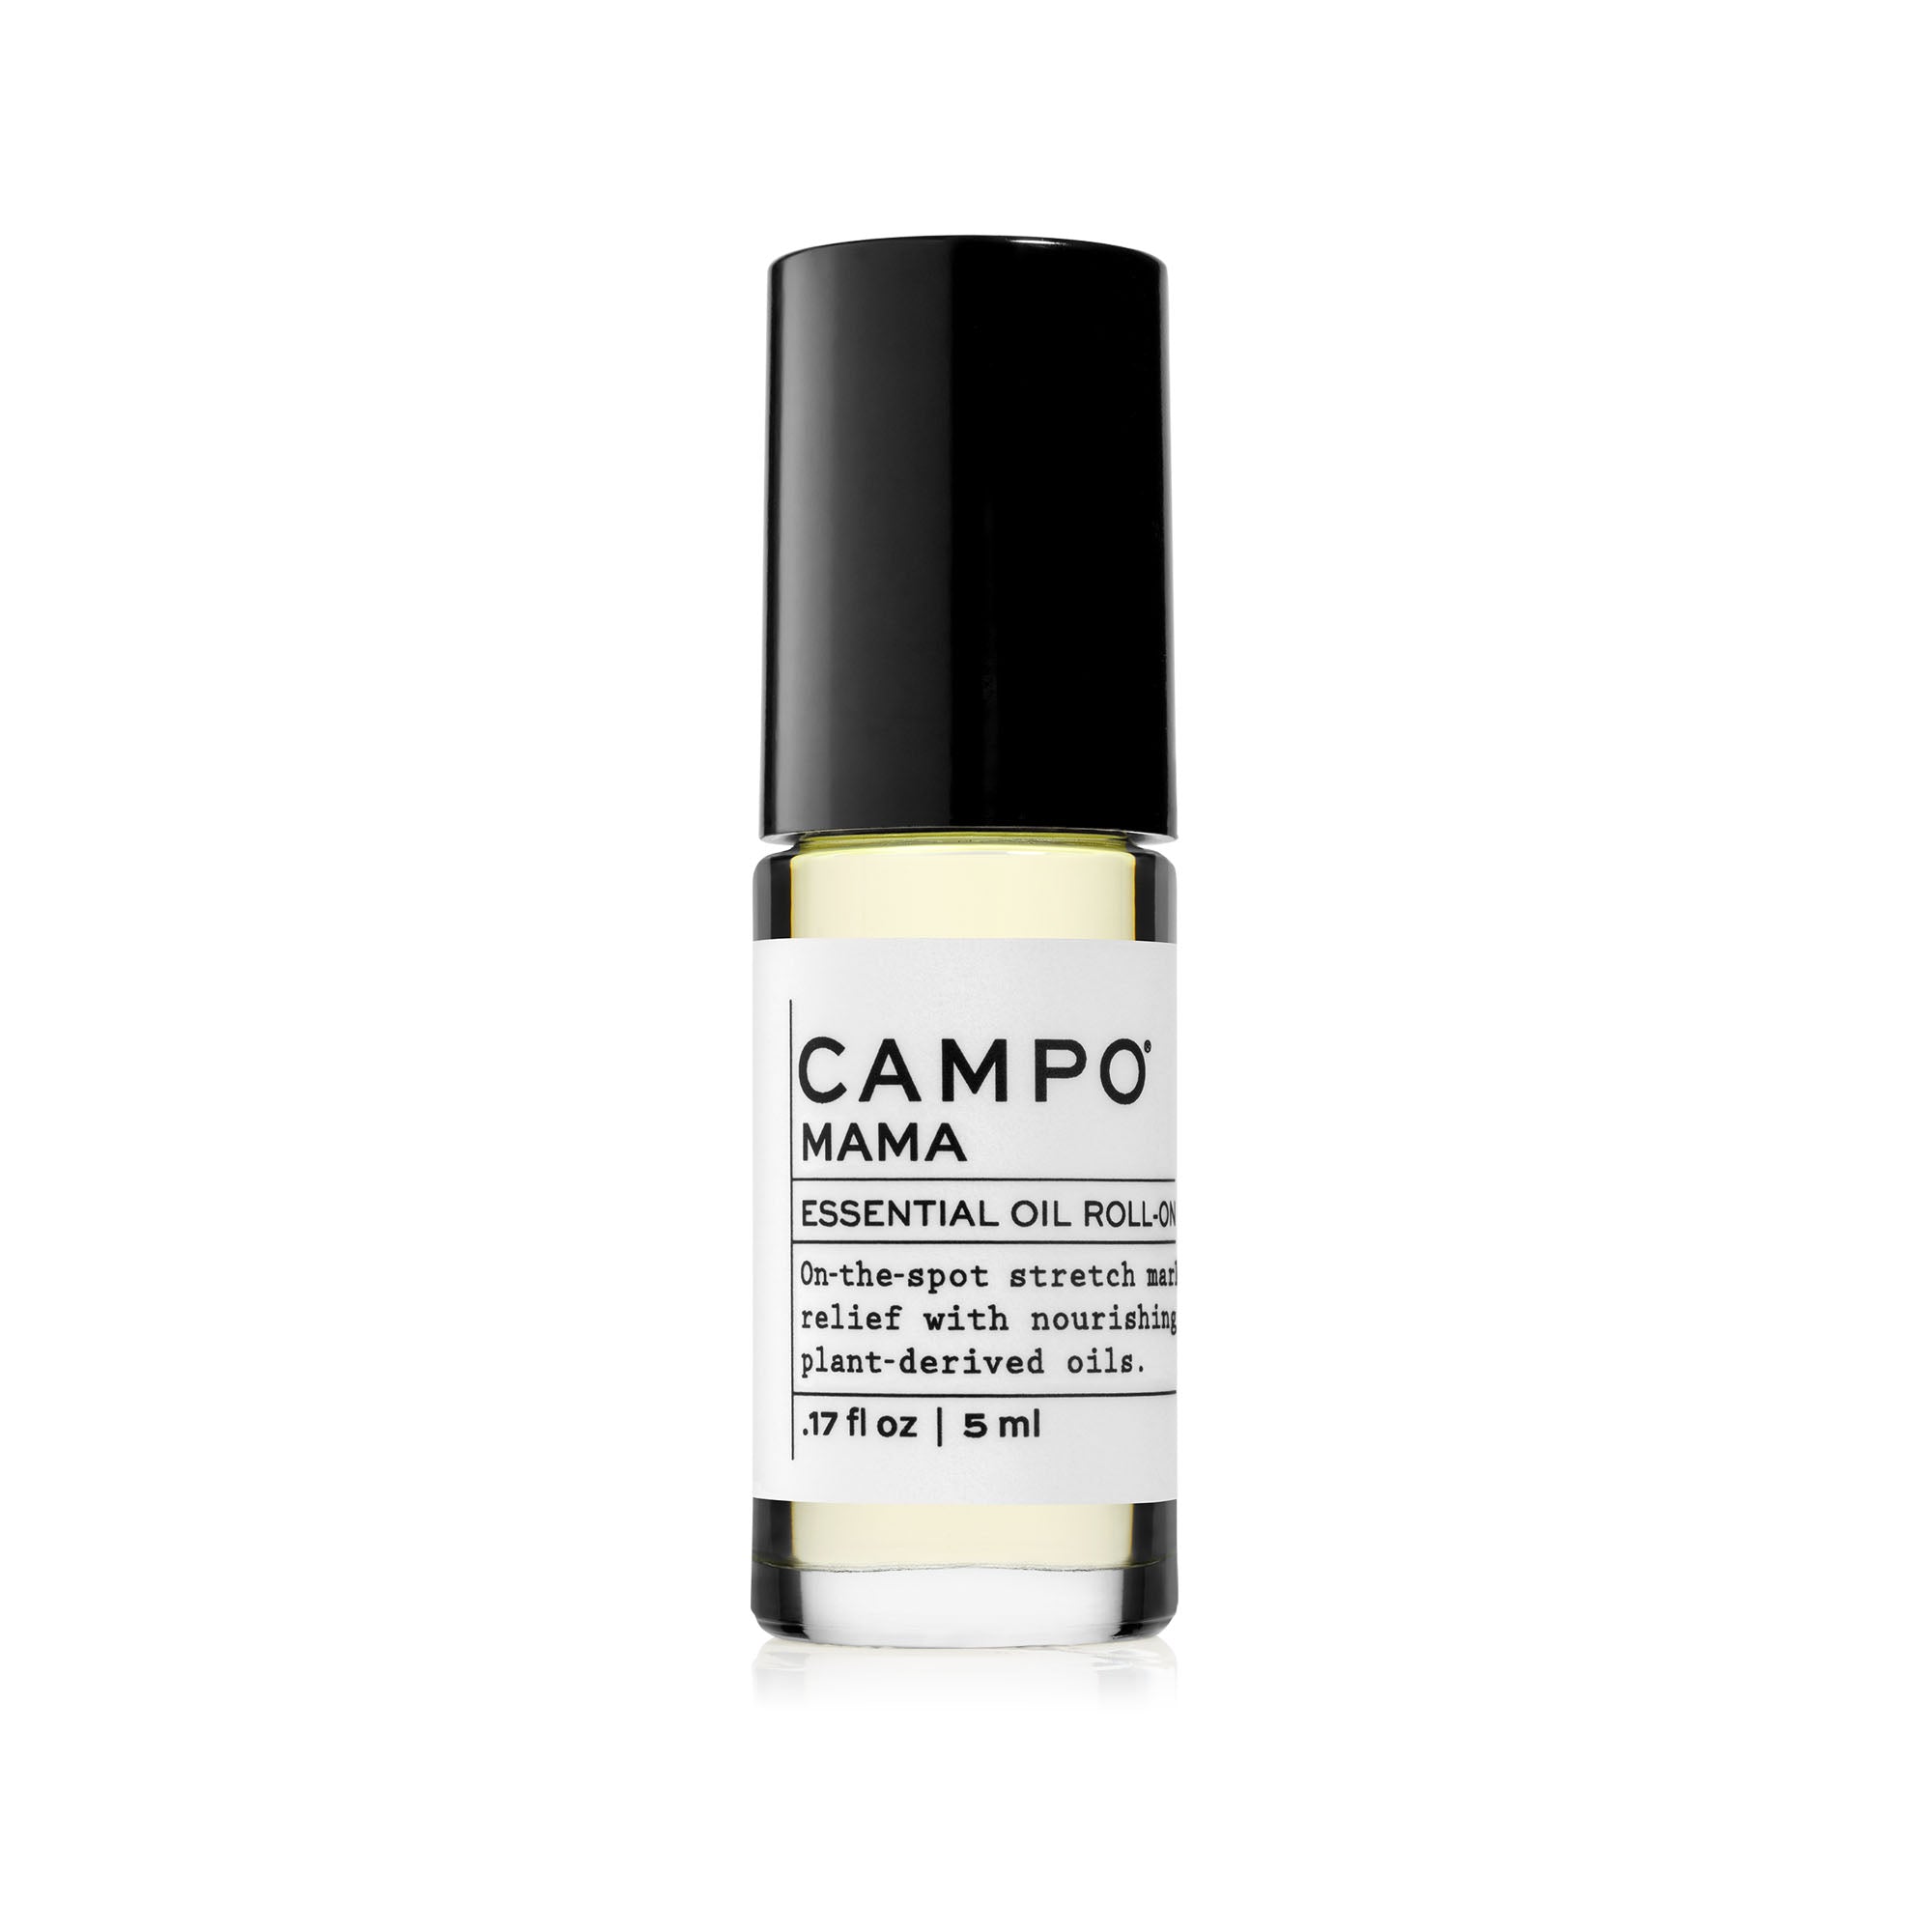 Campo Beauty Essential Oil MAMA Stretch Mark Relief Blend Roll-On that in 5 ml. On-the-spot relief of stretched skin with 100% natural nourishing plant-derived oils and pure essential oils of grapefruit, neroli orange blossom, and bergamot. Help prevent stretch marks and soothe the itch as you feel grounded and uplifted. It's pre-blended with 100% natural beauty carrier oils so it's ready to roll with you as you grow.